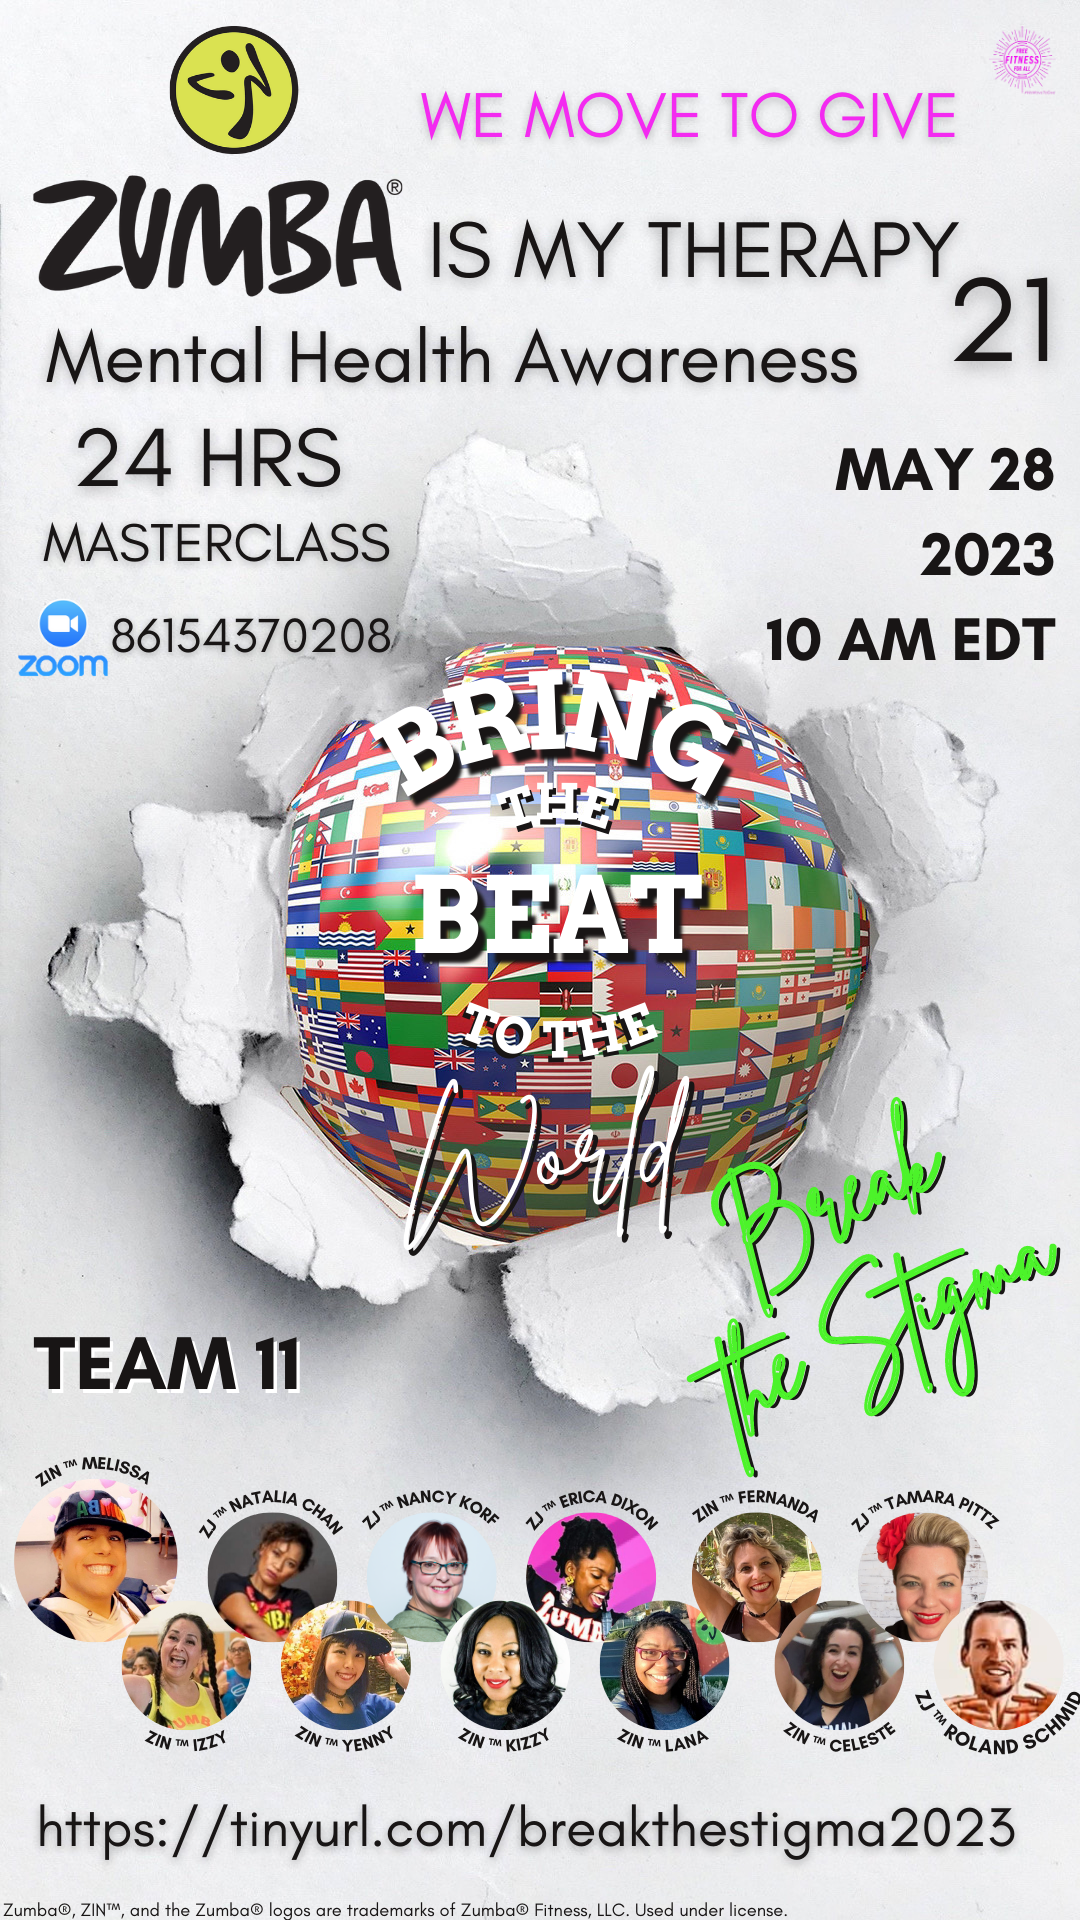 Team 11 - May 28th 10 AM EDT